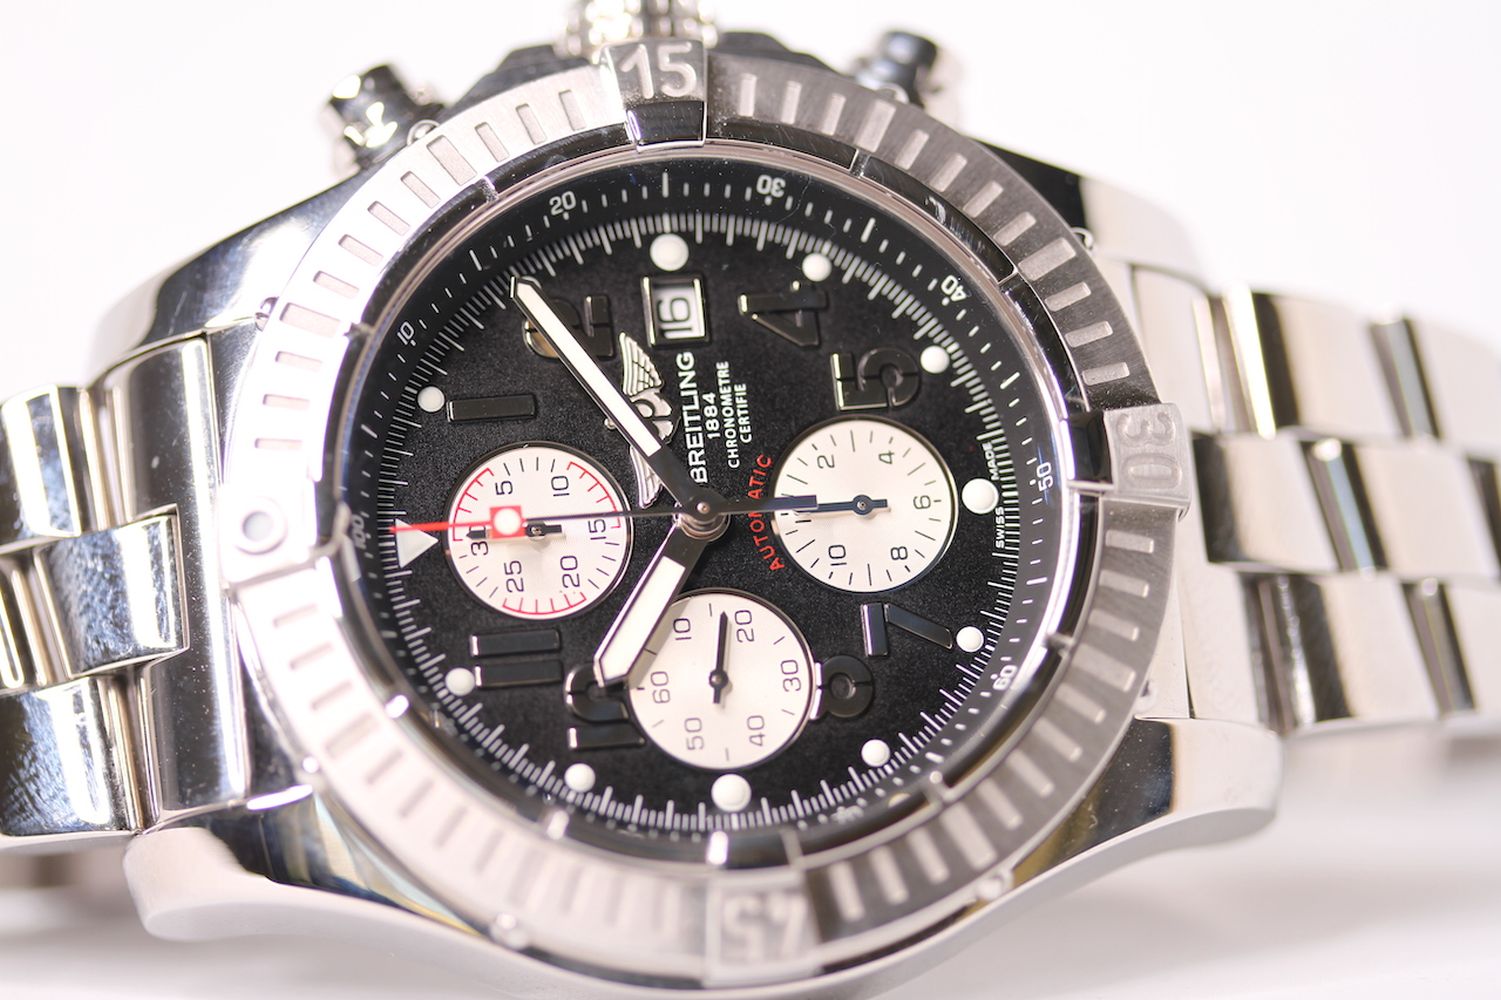 GENTLEMENS BREITLING SUPER AVENGER WRISTWATCH REF A13370 W/BOX & PAPERS, circular black dial with - Image 3 of 5